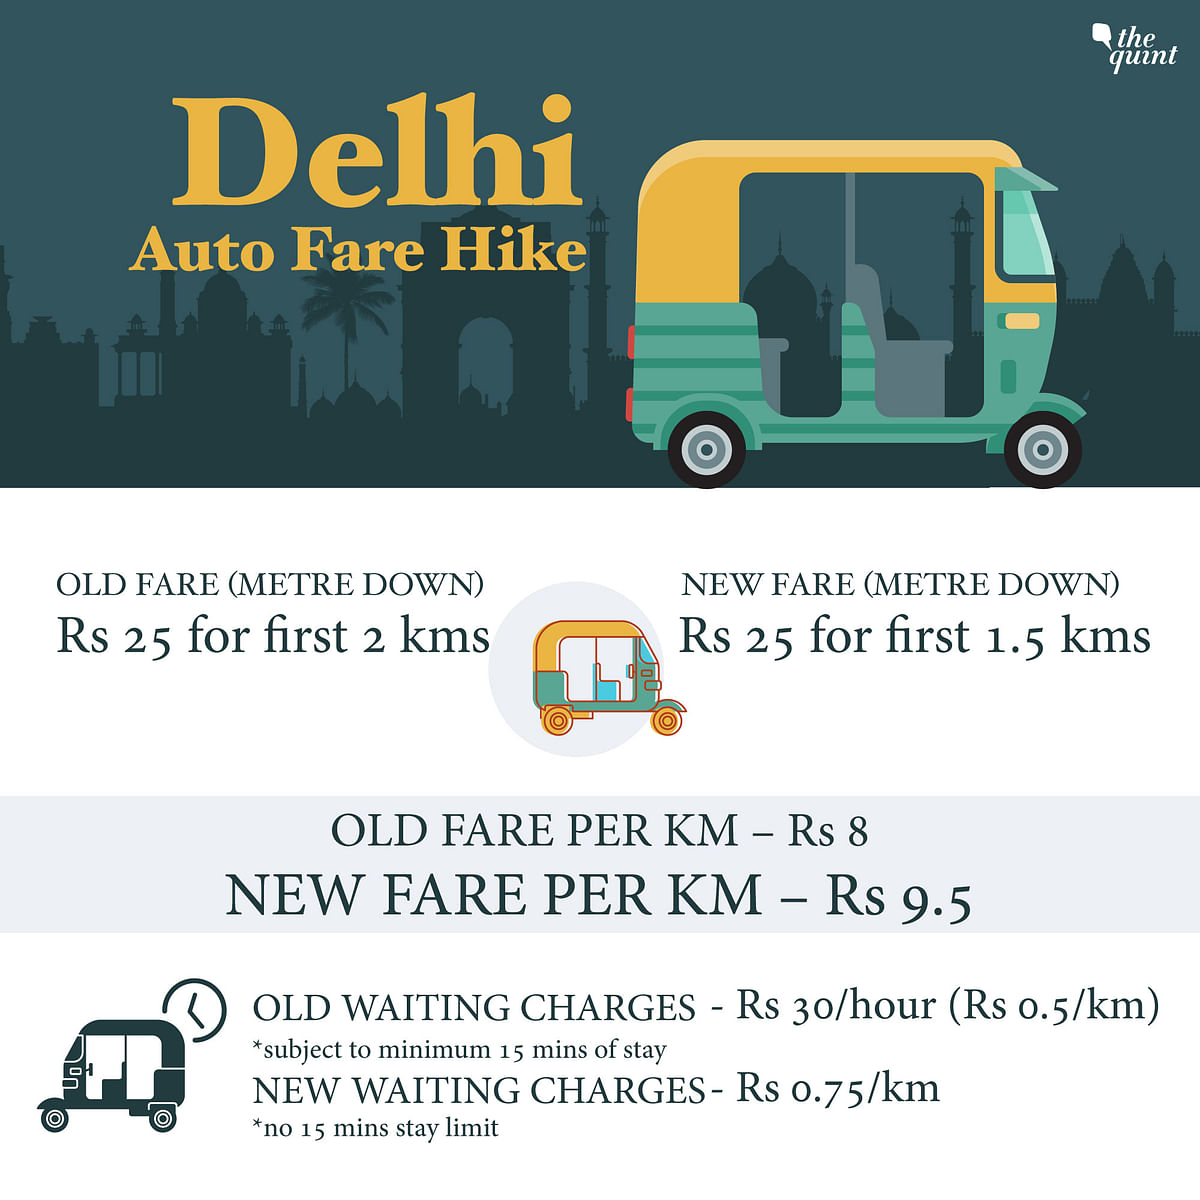 The metre would now charge Rs 25 for the first 1.5 kms, a change from the previous 2 kms for the same amount. 